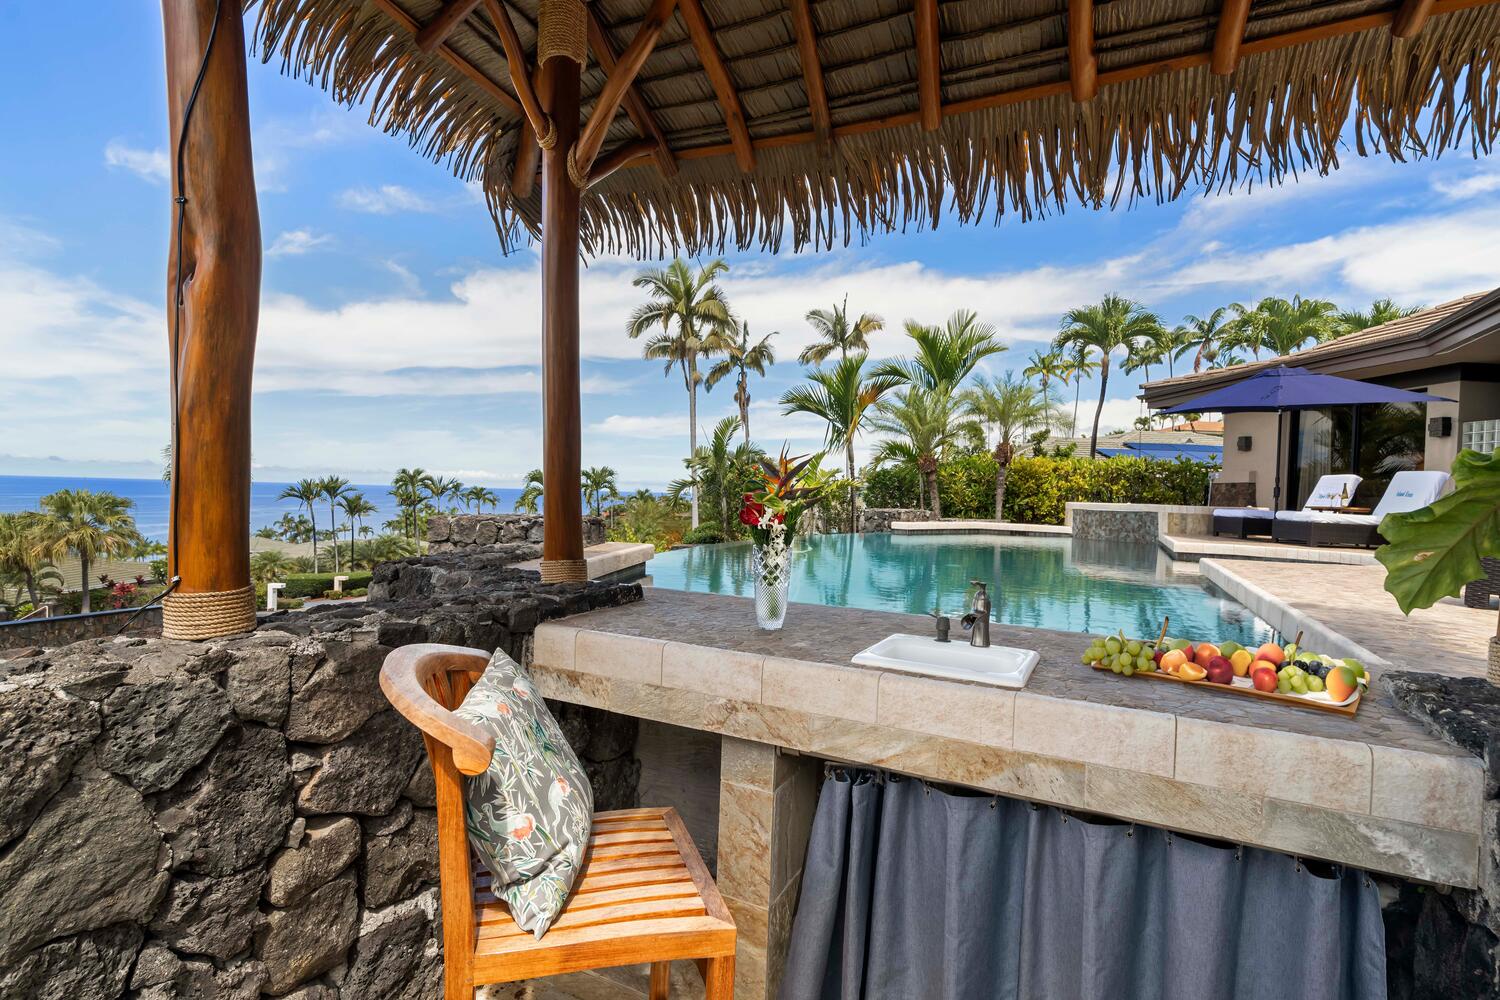 Kailua Kona Vacation Rentals, Island Oasis - Experience the essence of tropical living with our authentic palapa, a haven of relaxation amidst nature's beauty.